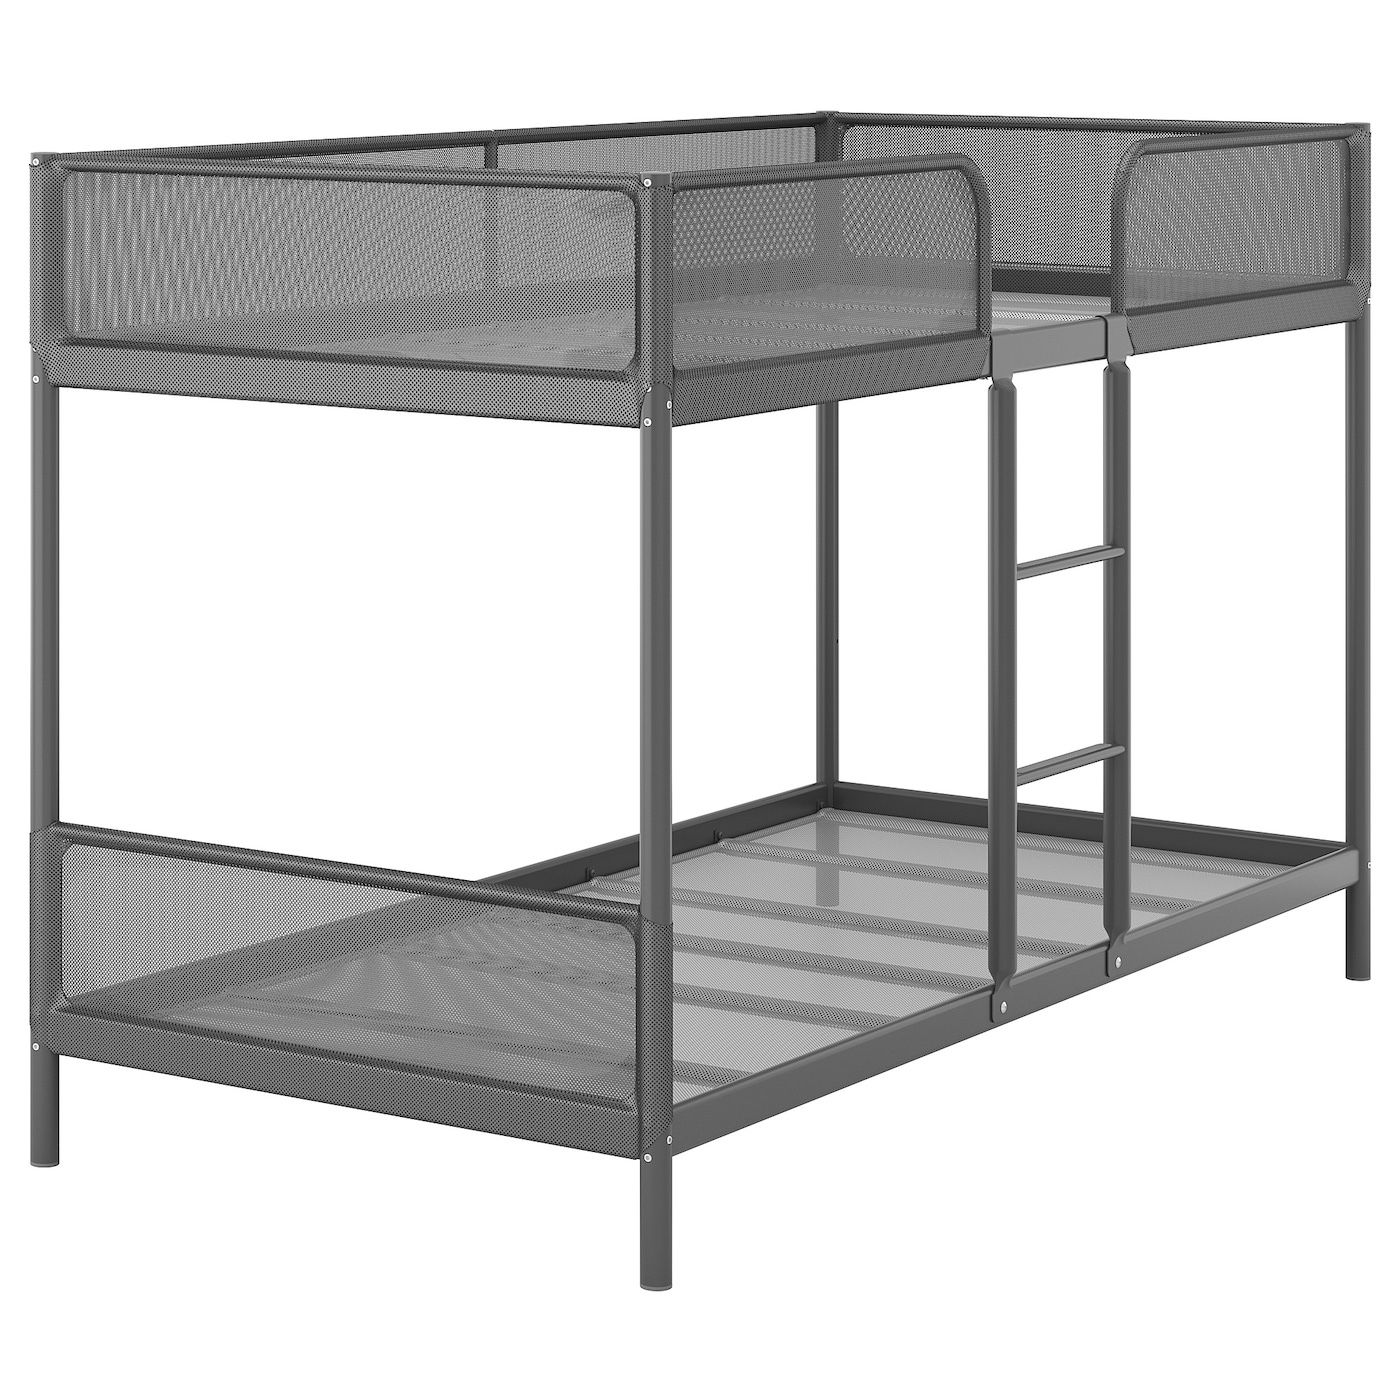 IKEA Tuffing Bunk Bed